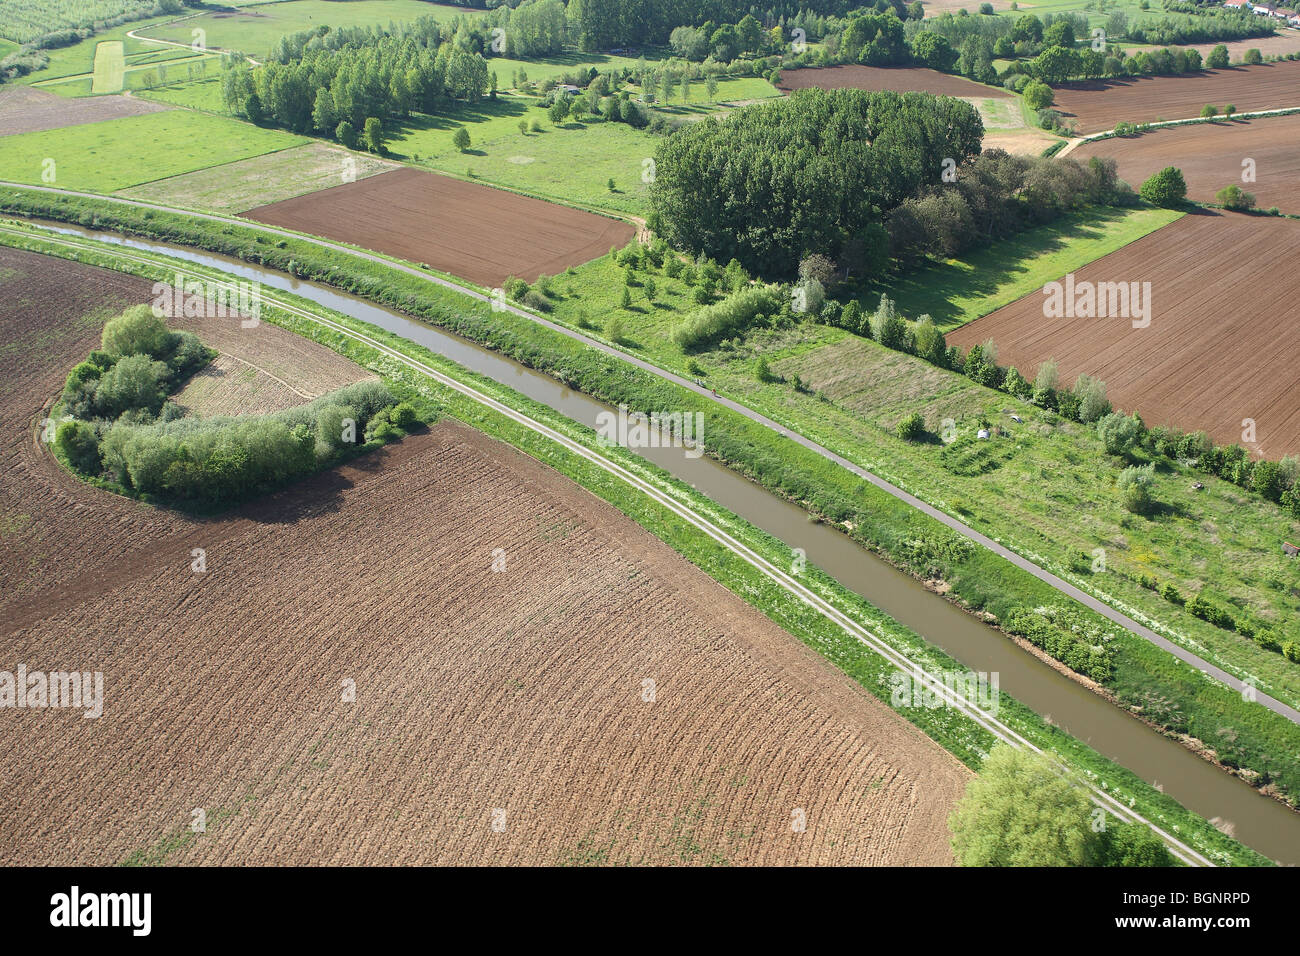 Old meander in fields, grasslands and forested area along river Demer, valley of Demer, Belgium Stock Photo